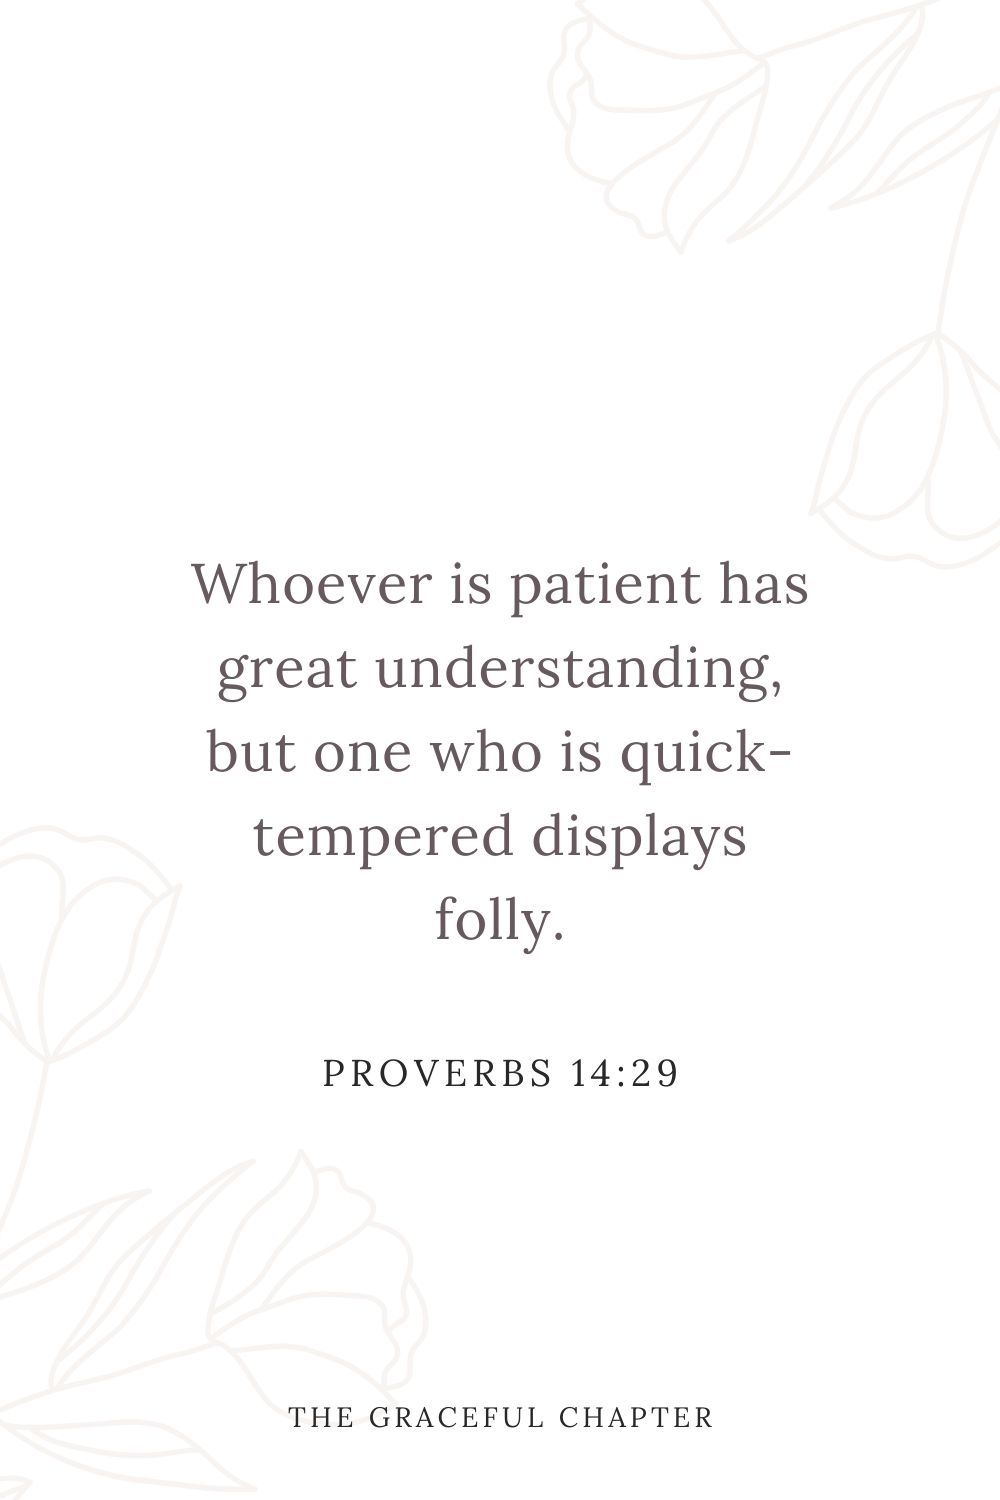 Whoever is patient has great understanding, but one who is quick-tempered displays folly. Proverbs 14:29